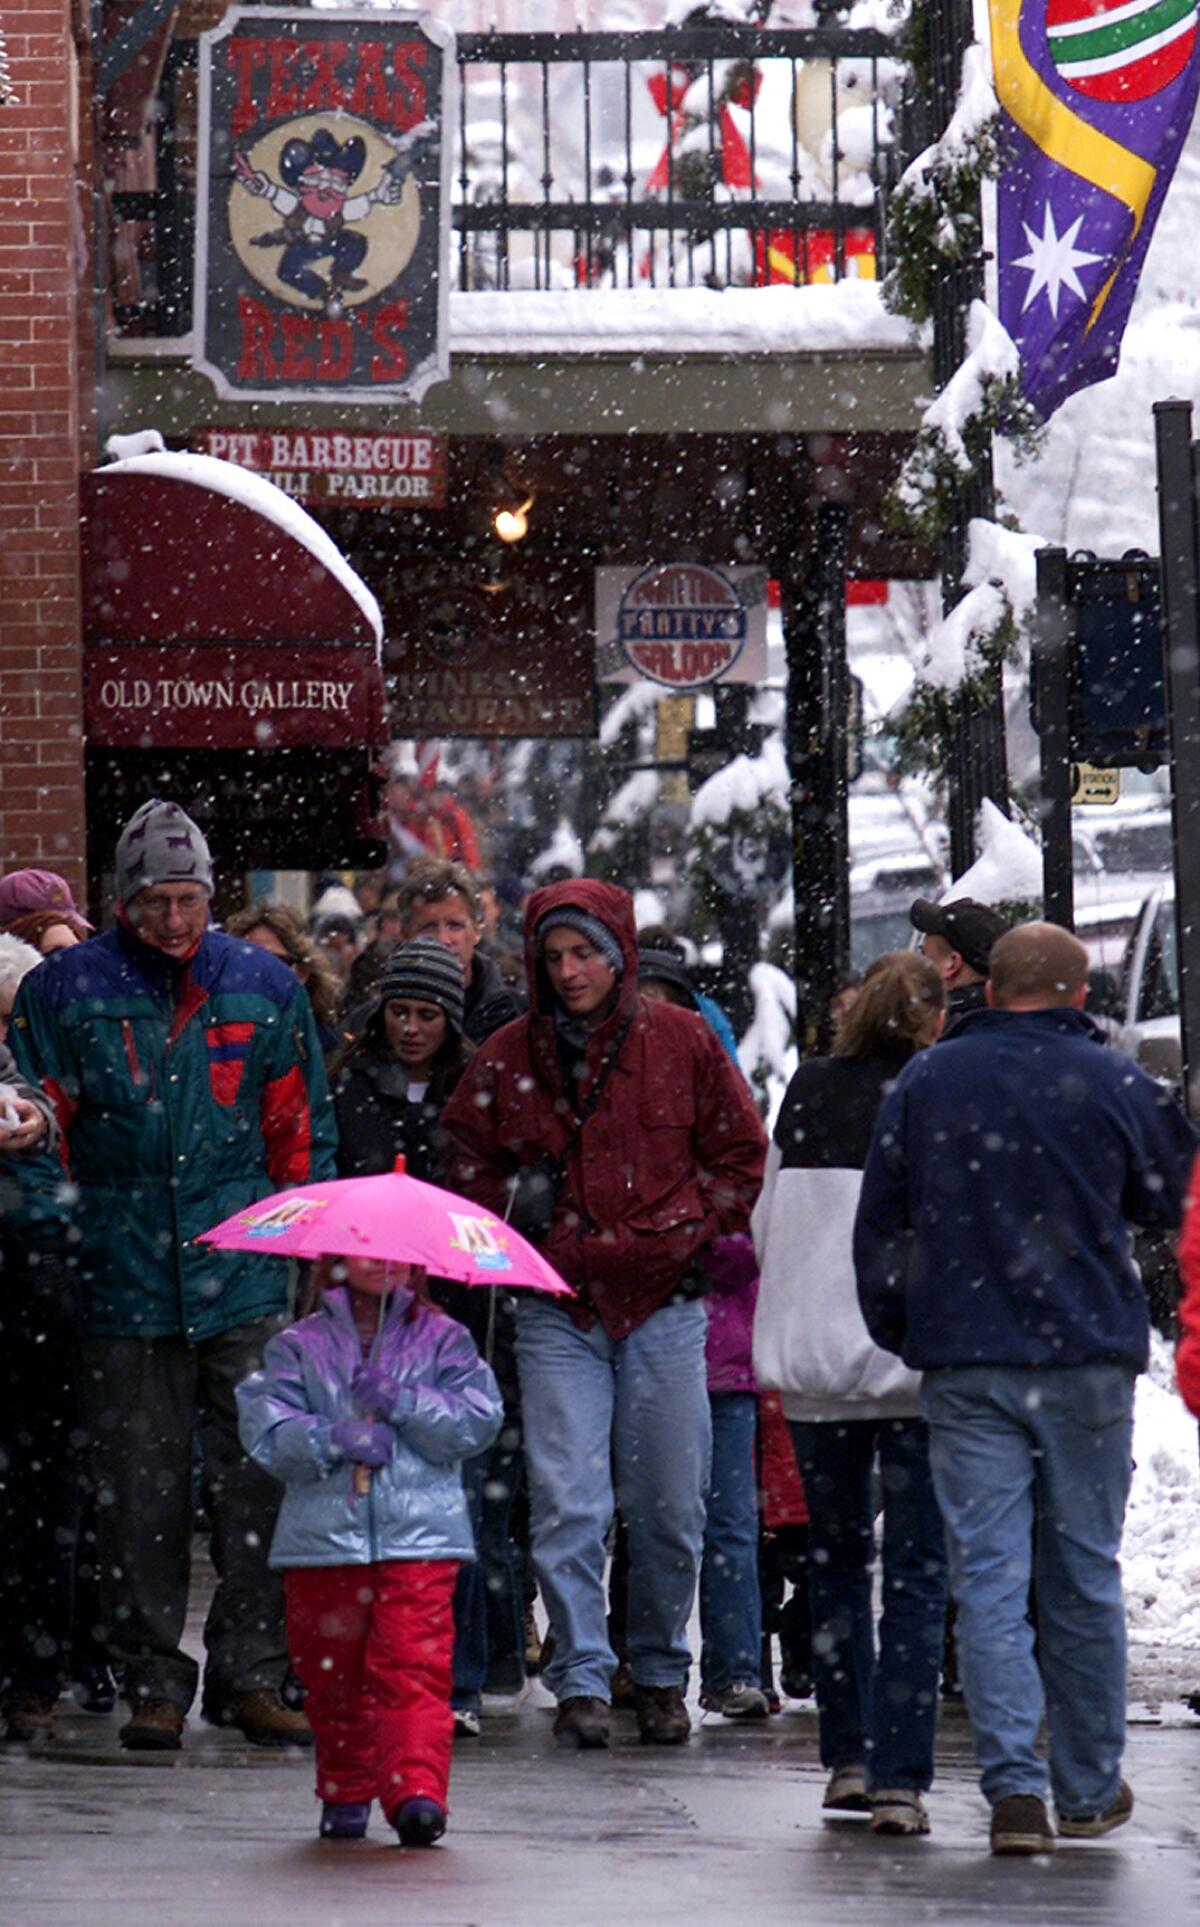 Snow falls in a file photo of Park City, Utah, where Los Angeles Mayor Eric Garcetti plans to attend the Sundance Film Festival.